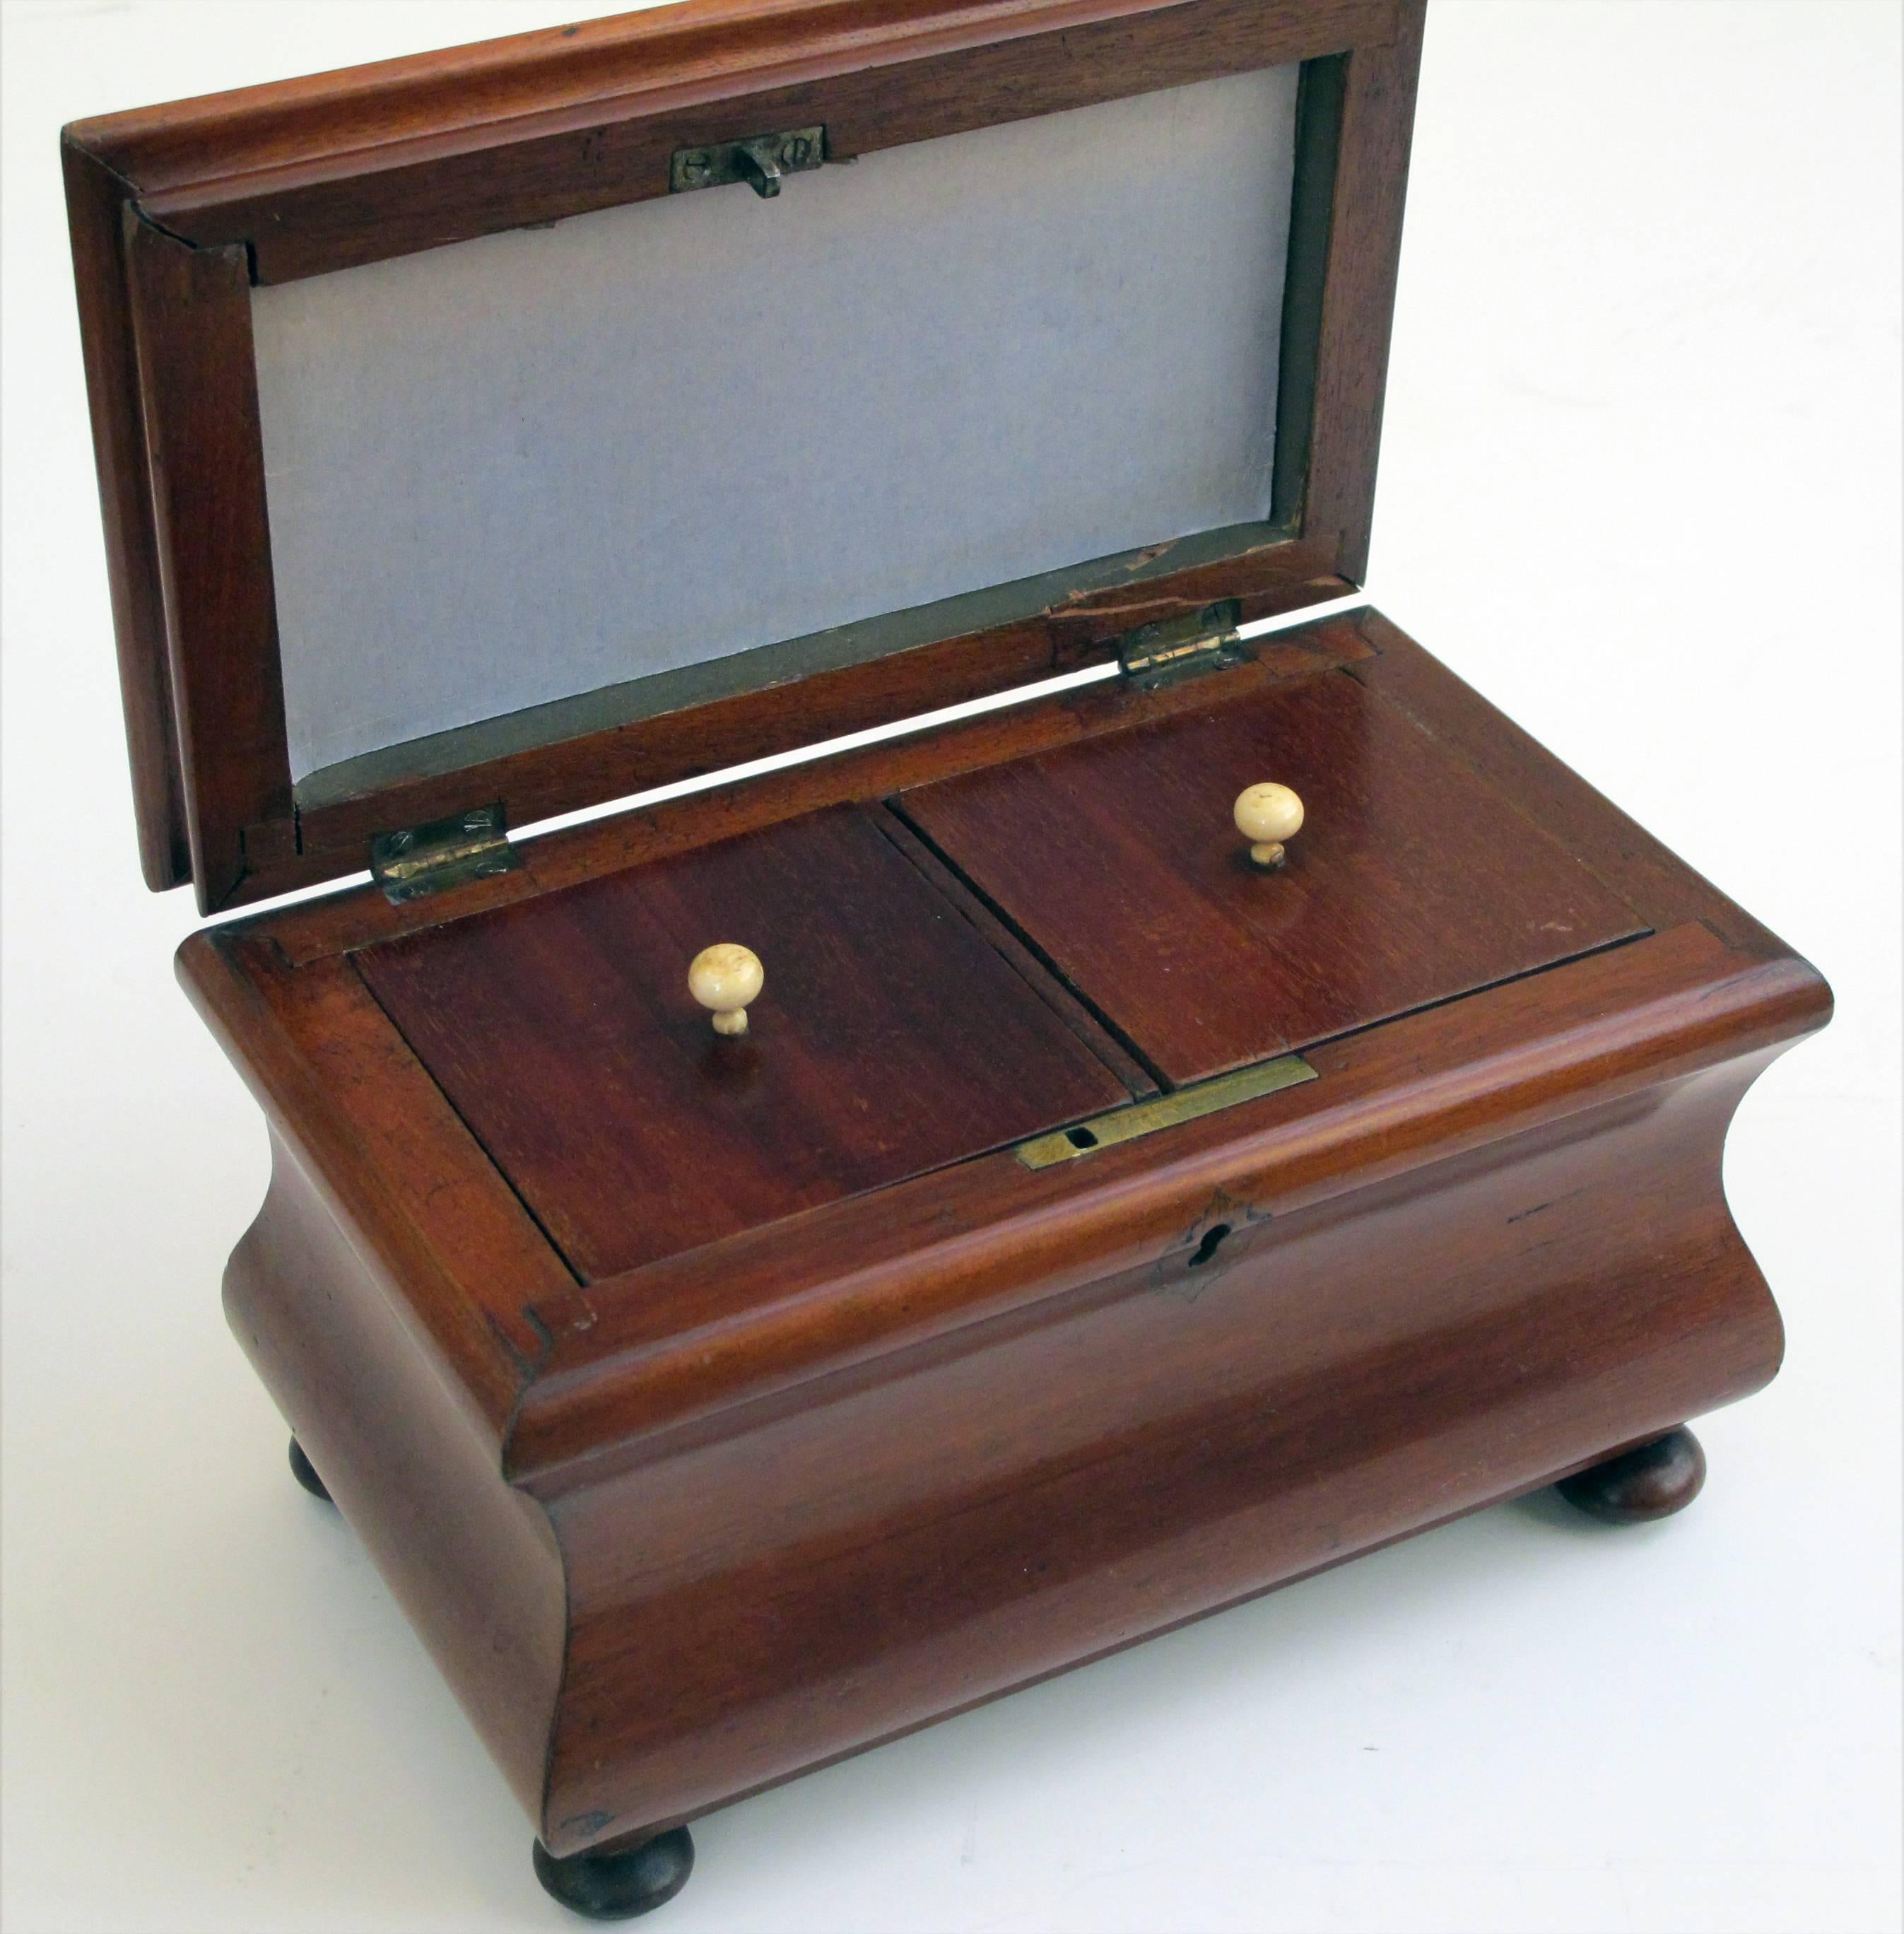 A shapely English Victorian bombe-form mahogany tea caddy on bun feet; the shaped lid opening to reveal double compartments; resting on a waisted body all-over bun feet.